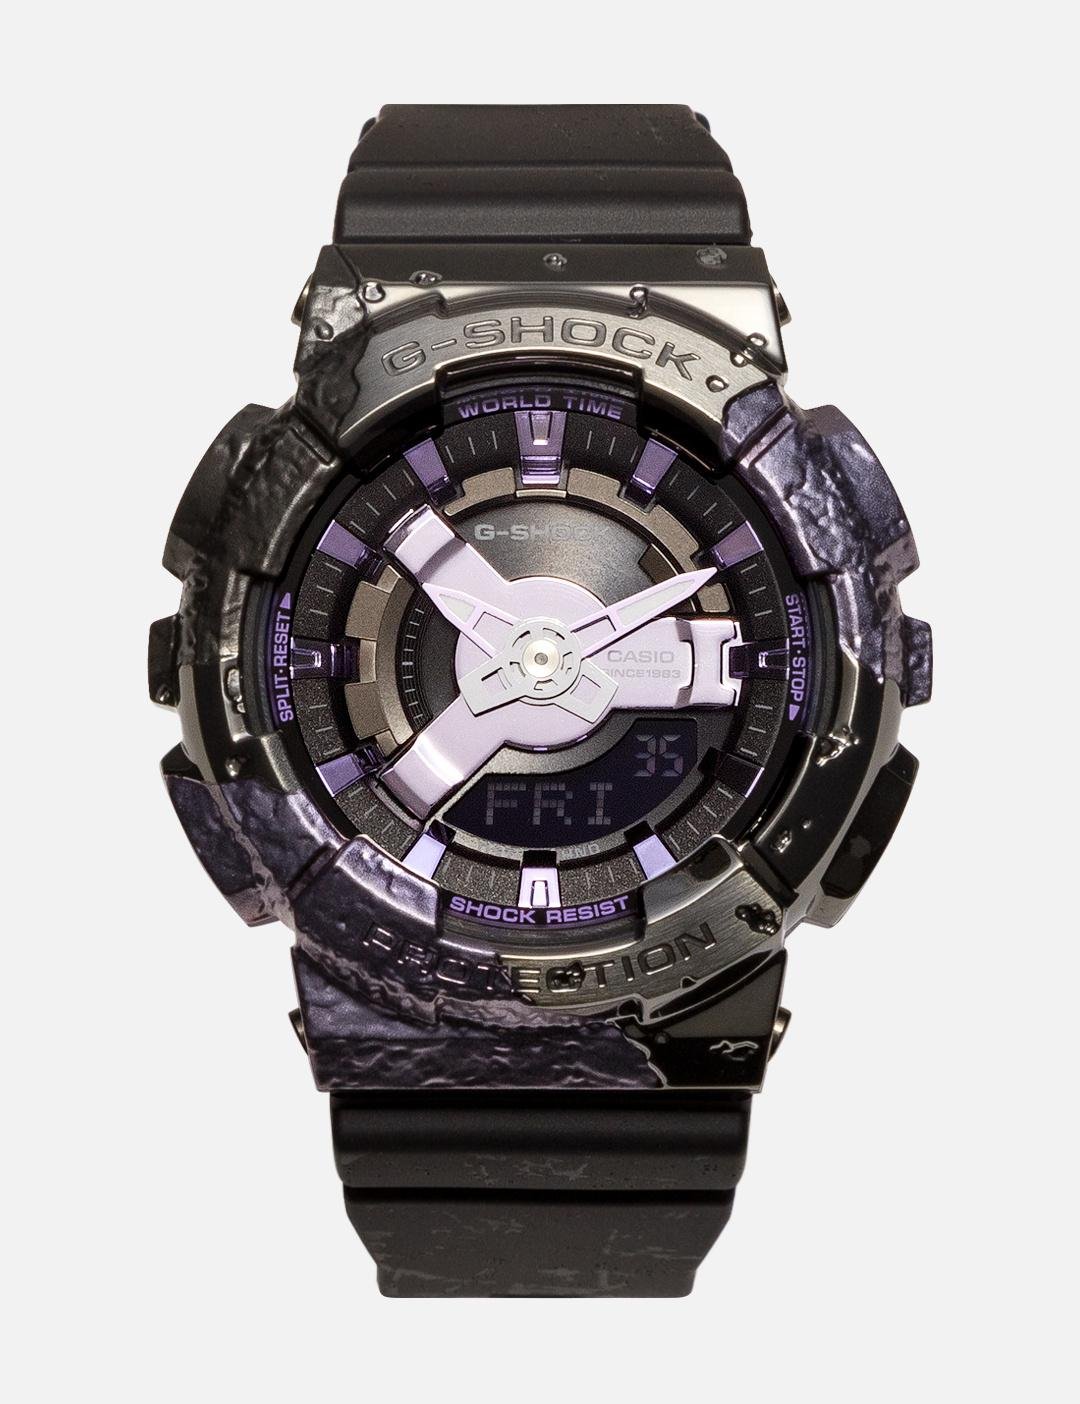 Limited Edition GM-S114GEM-1A2 by CASIO